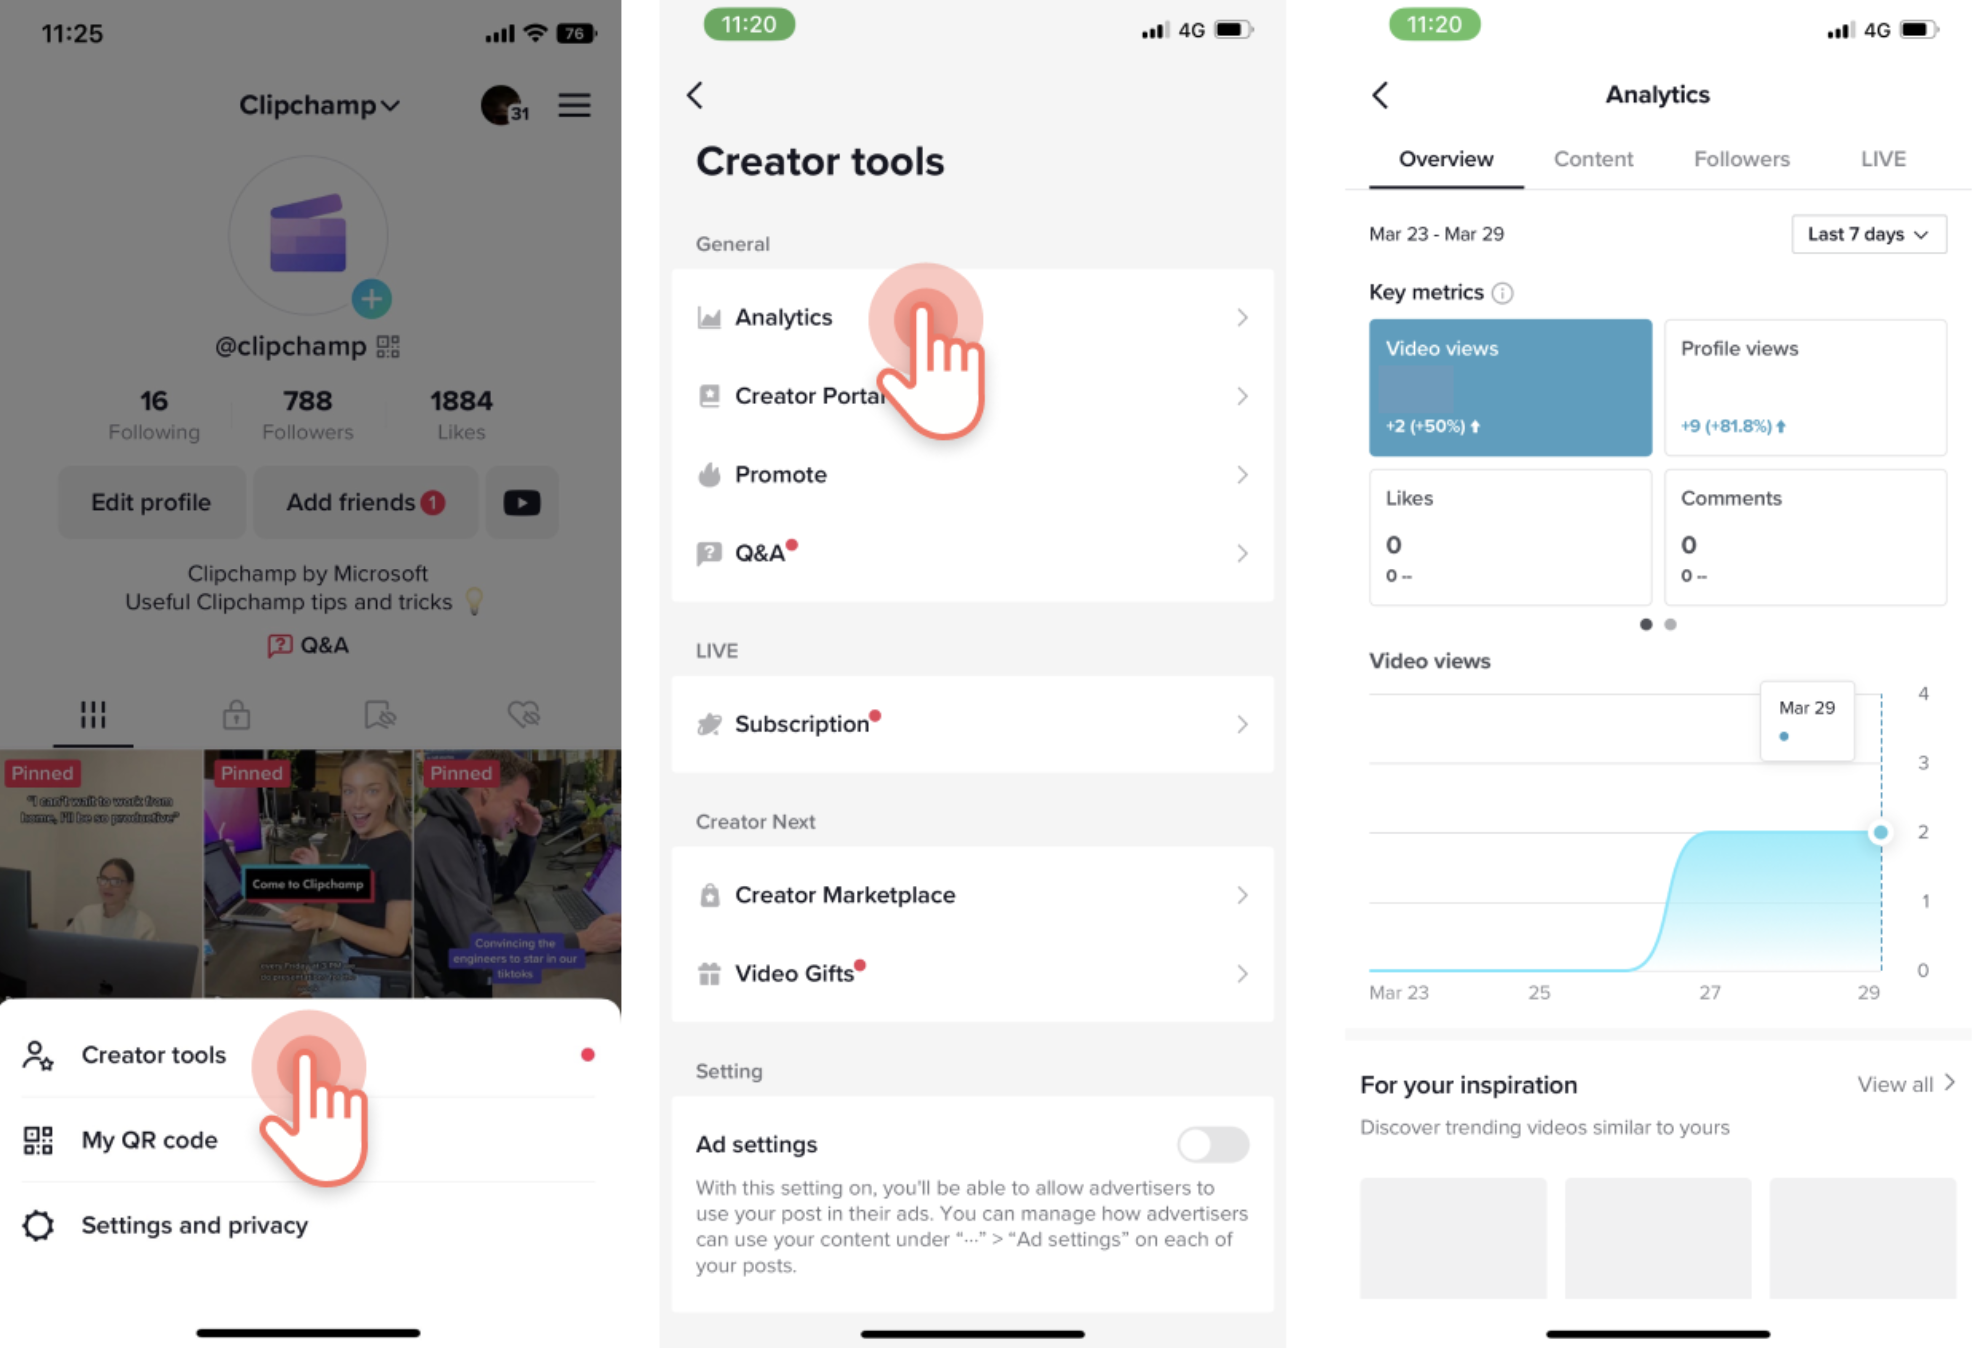 From TikTok to MP4: The Ultimate Guide 